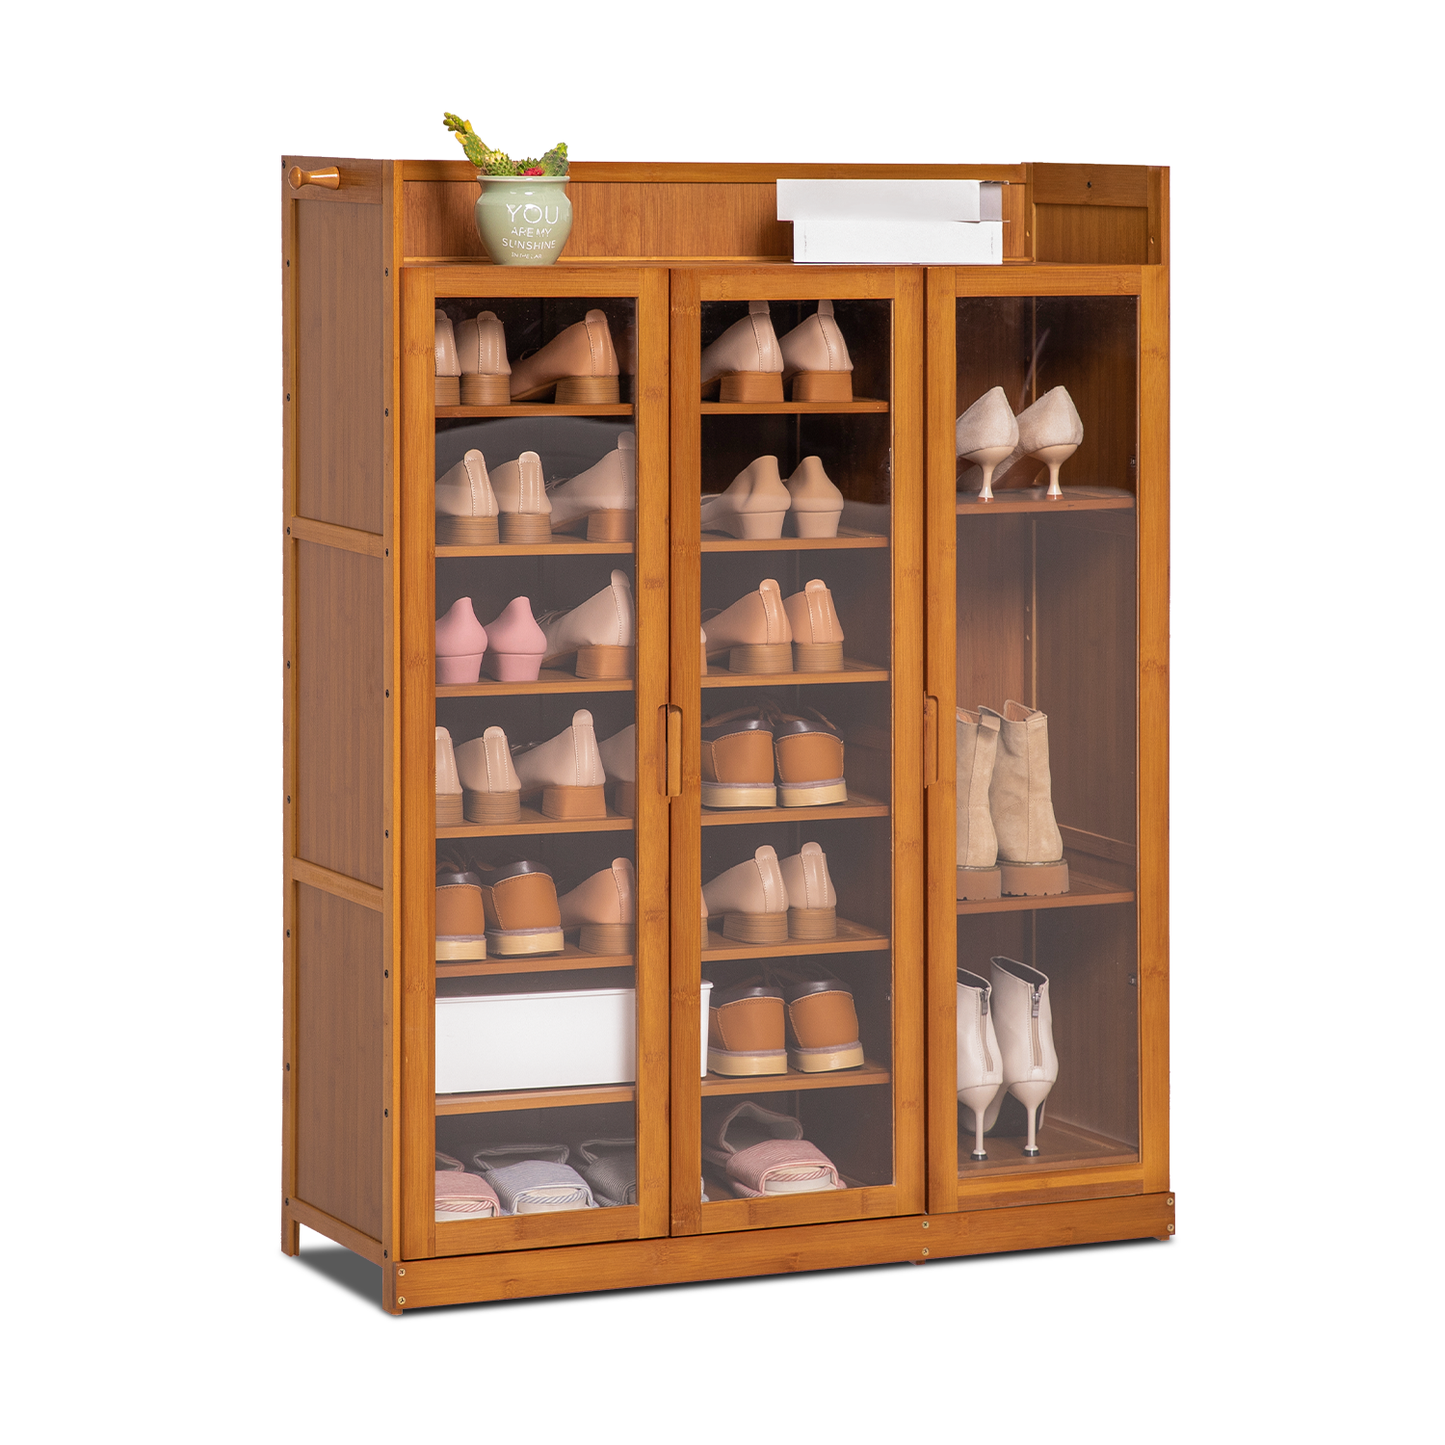 Visible Three-Doors Roofless Shoe Organizer w/Boots Compartments - Bamboo/Acrylic - Brown